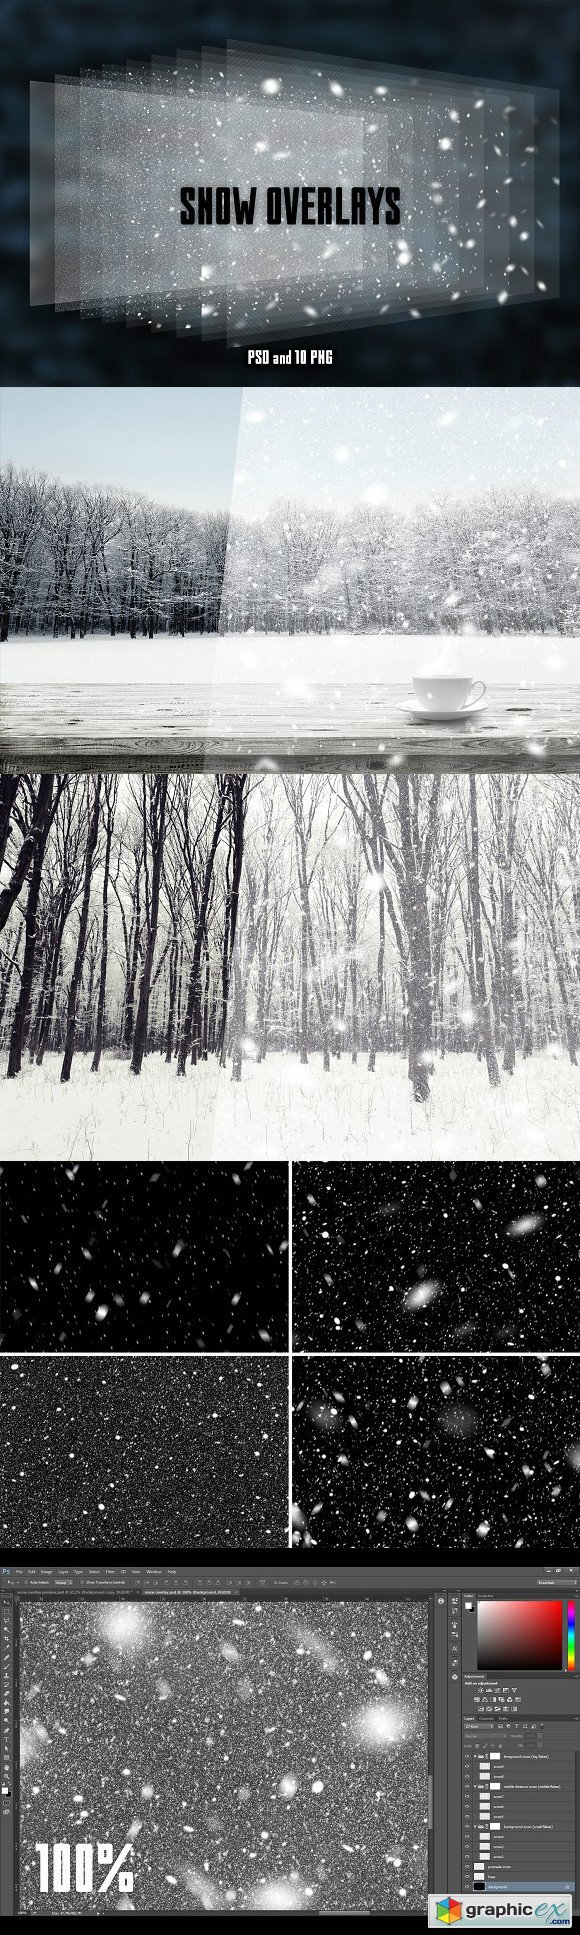 Real snow overlays for your photos